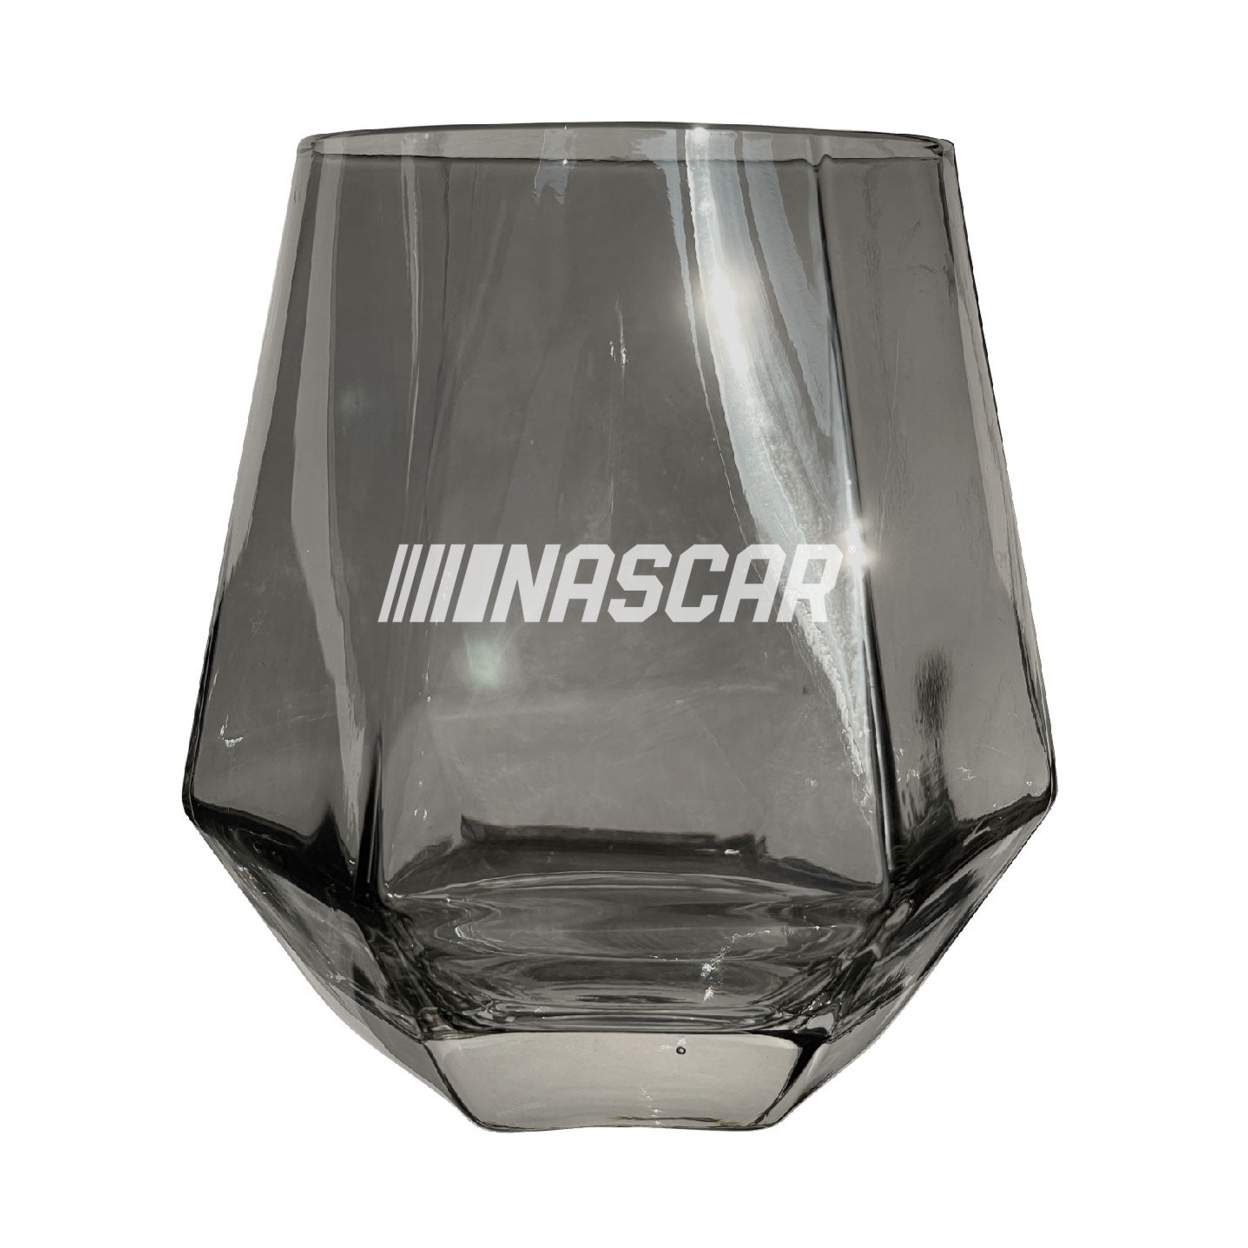 NASCAR Officially Licensed 10 Oz Engraved Diamond Wine Glass - Clear, Single